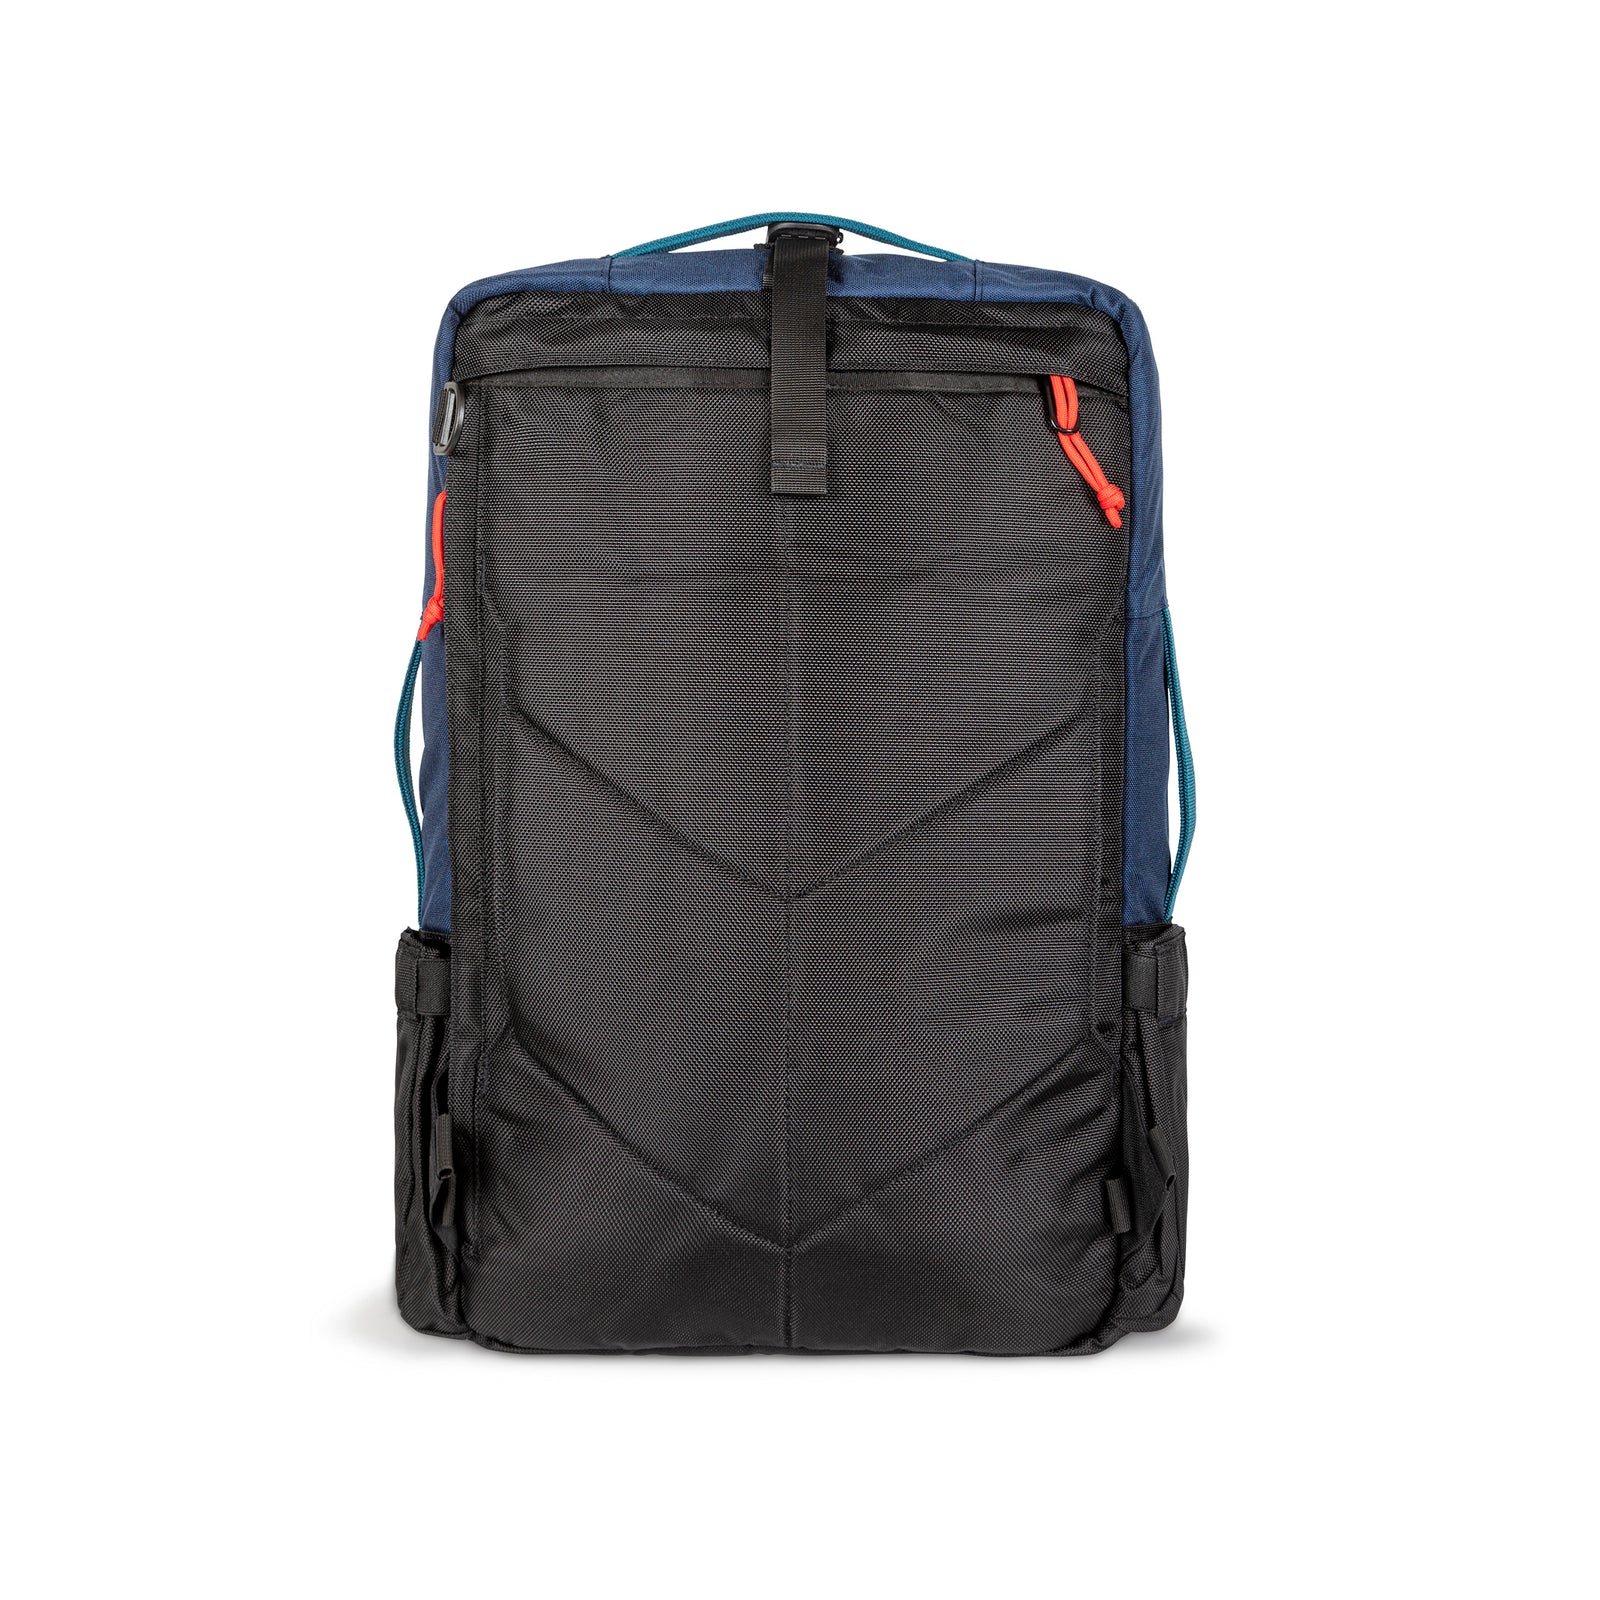 General back panel shot of Topo Designs Global Travel Bag 30L Durable Carry On Convertible Laptop Travel Backpack in Navy blue with straps tucked away.